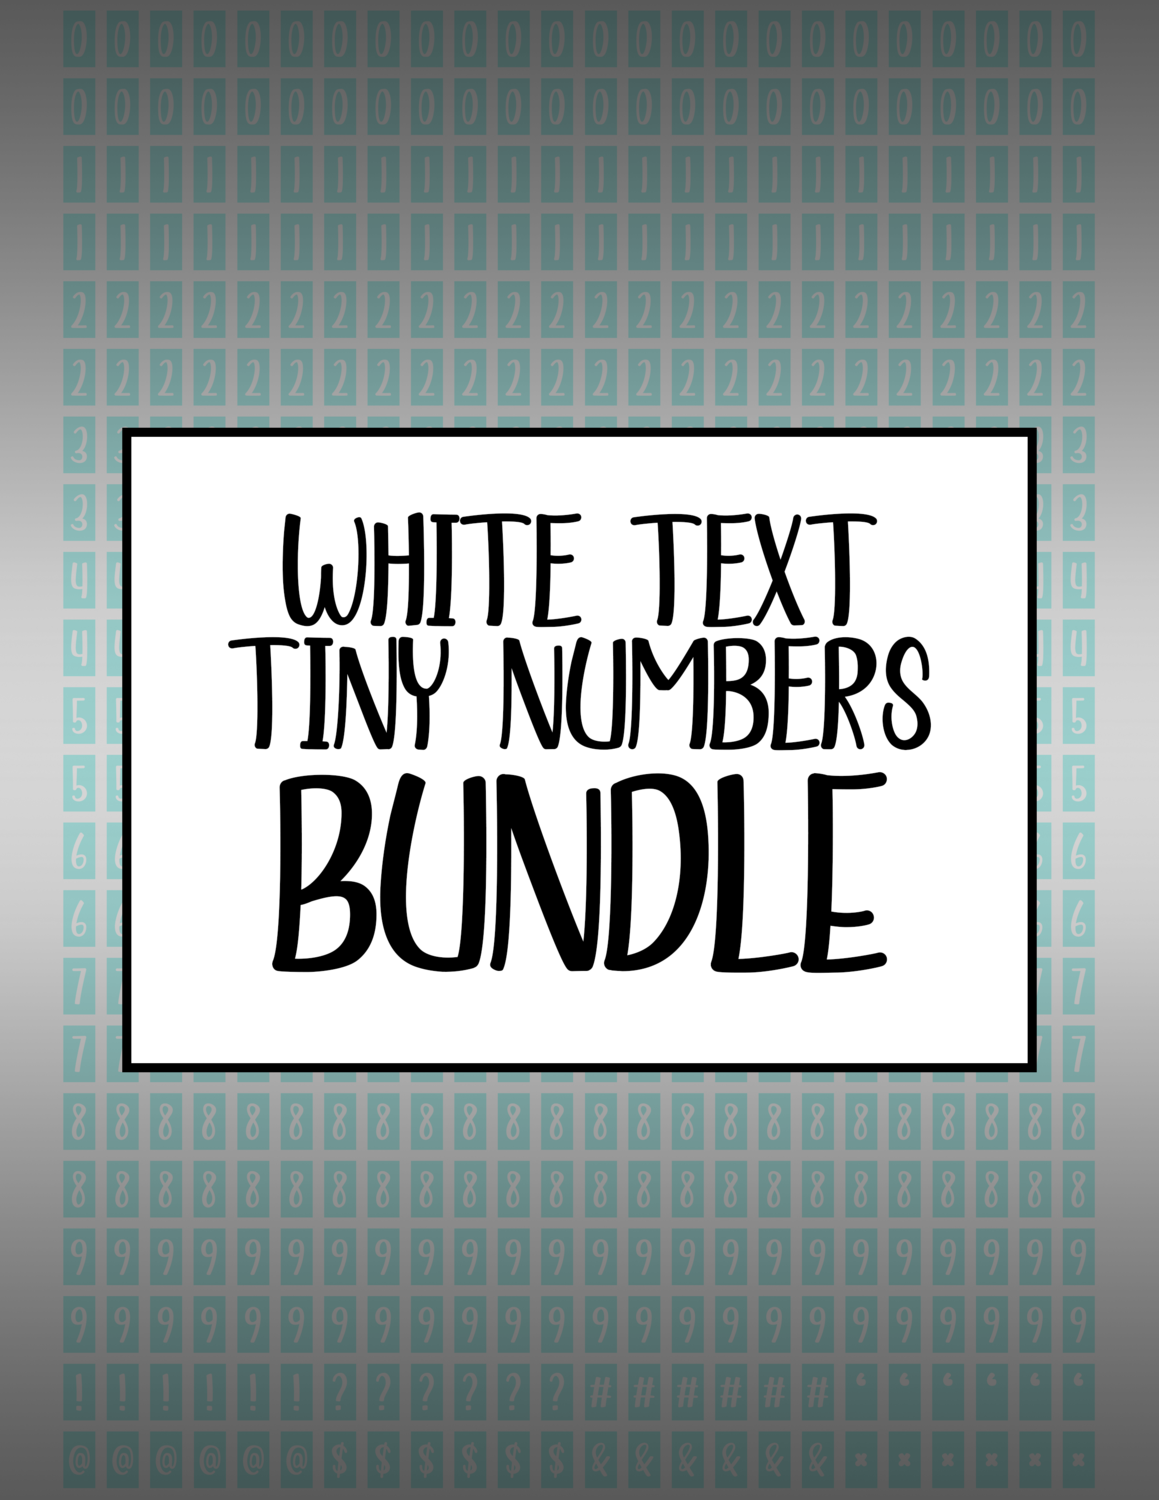 Bundle #21 Tiny Numbers - White Text